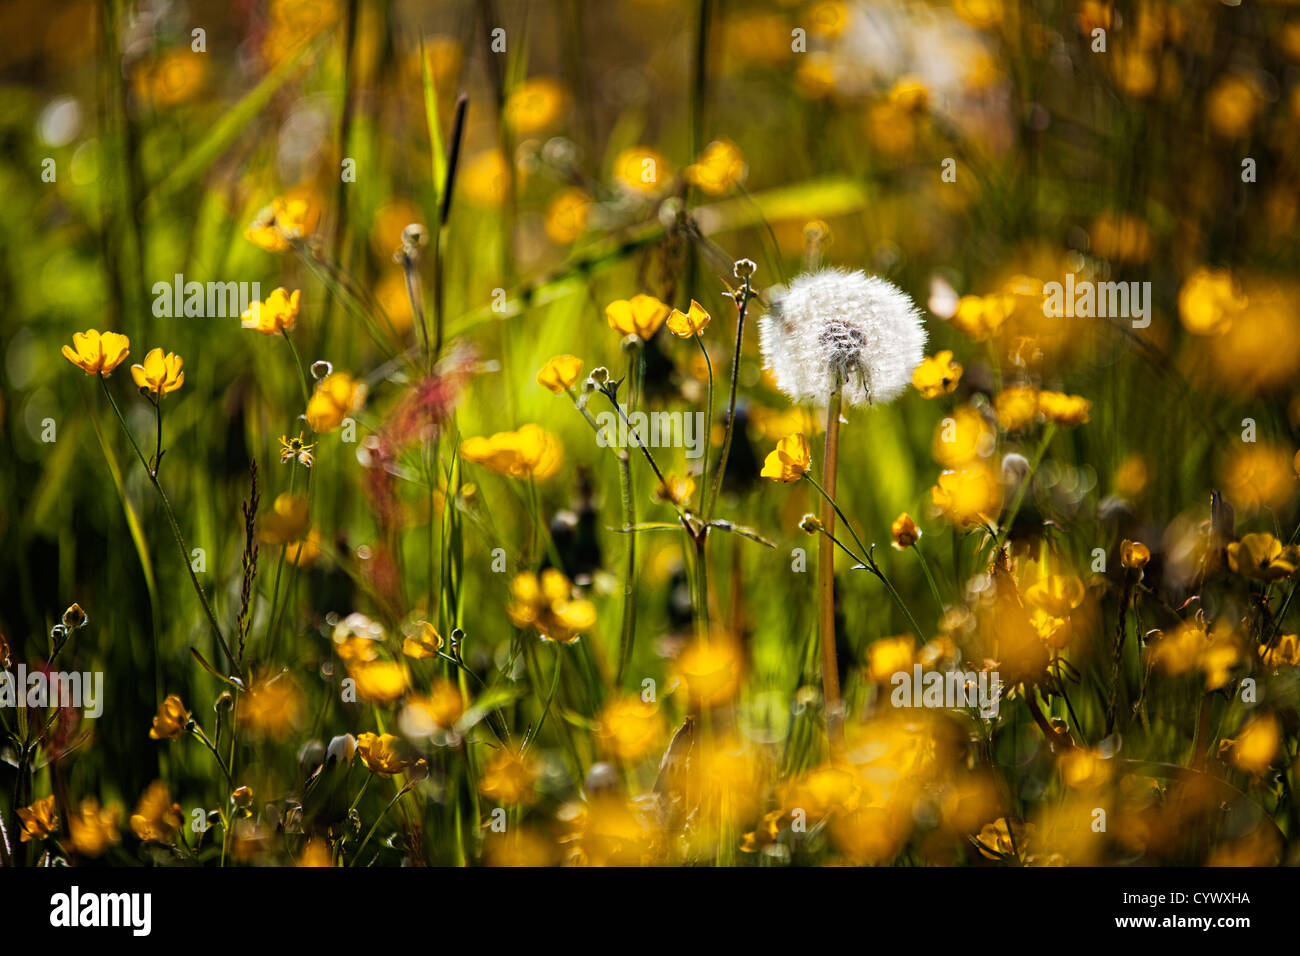 A shot of somer wild flowers appearing in northern Norway. Narrow dept of field. Nice bokeh. Stock Photo